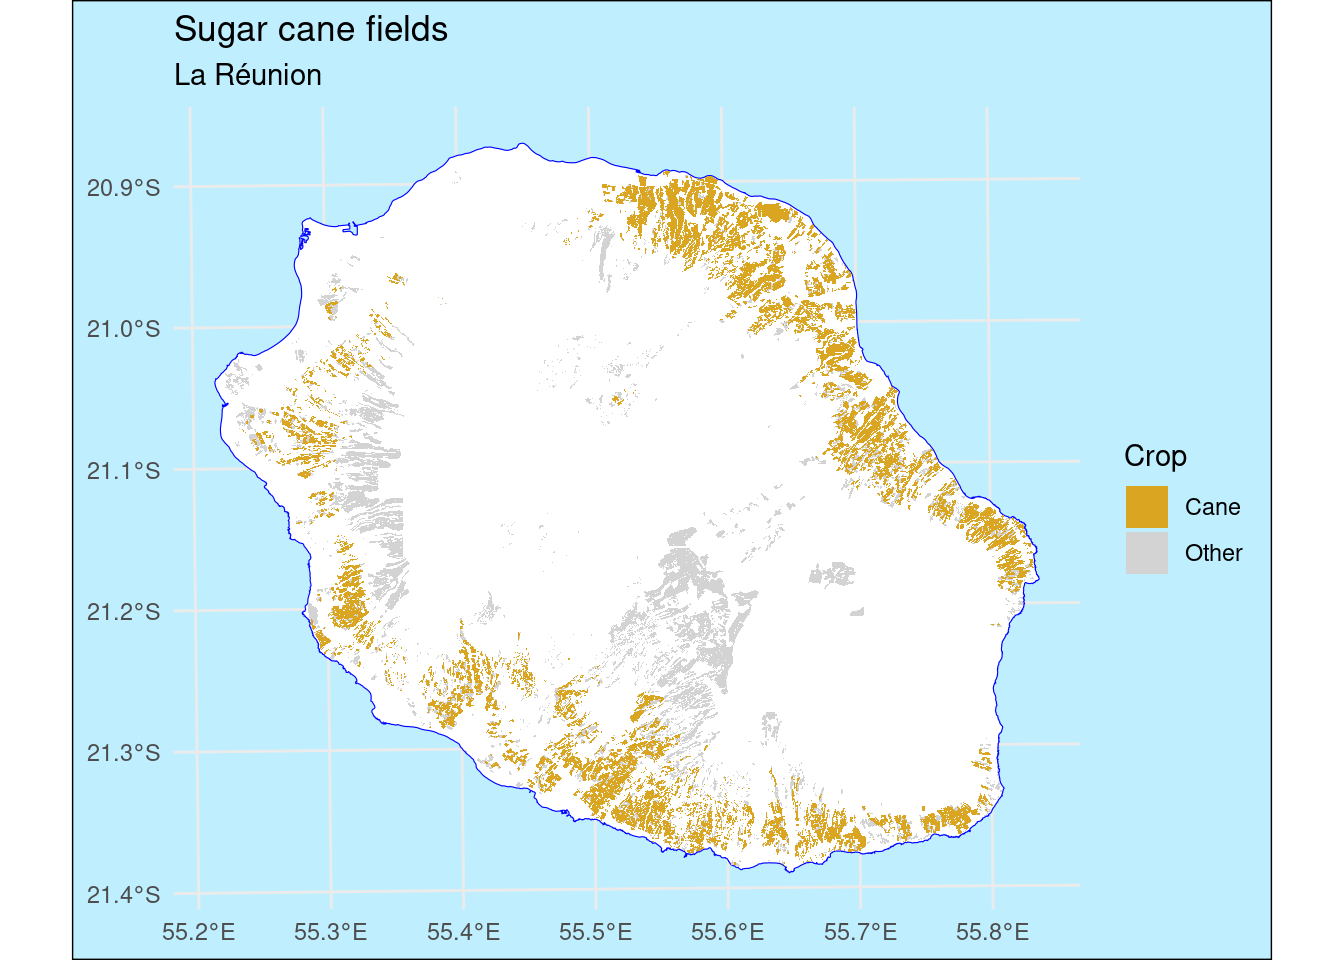 A map of La Réunion crops highlighting the sugar cane fields